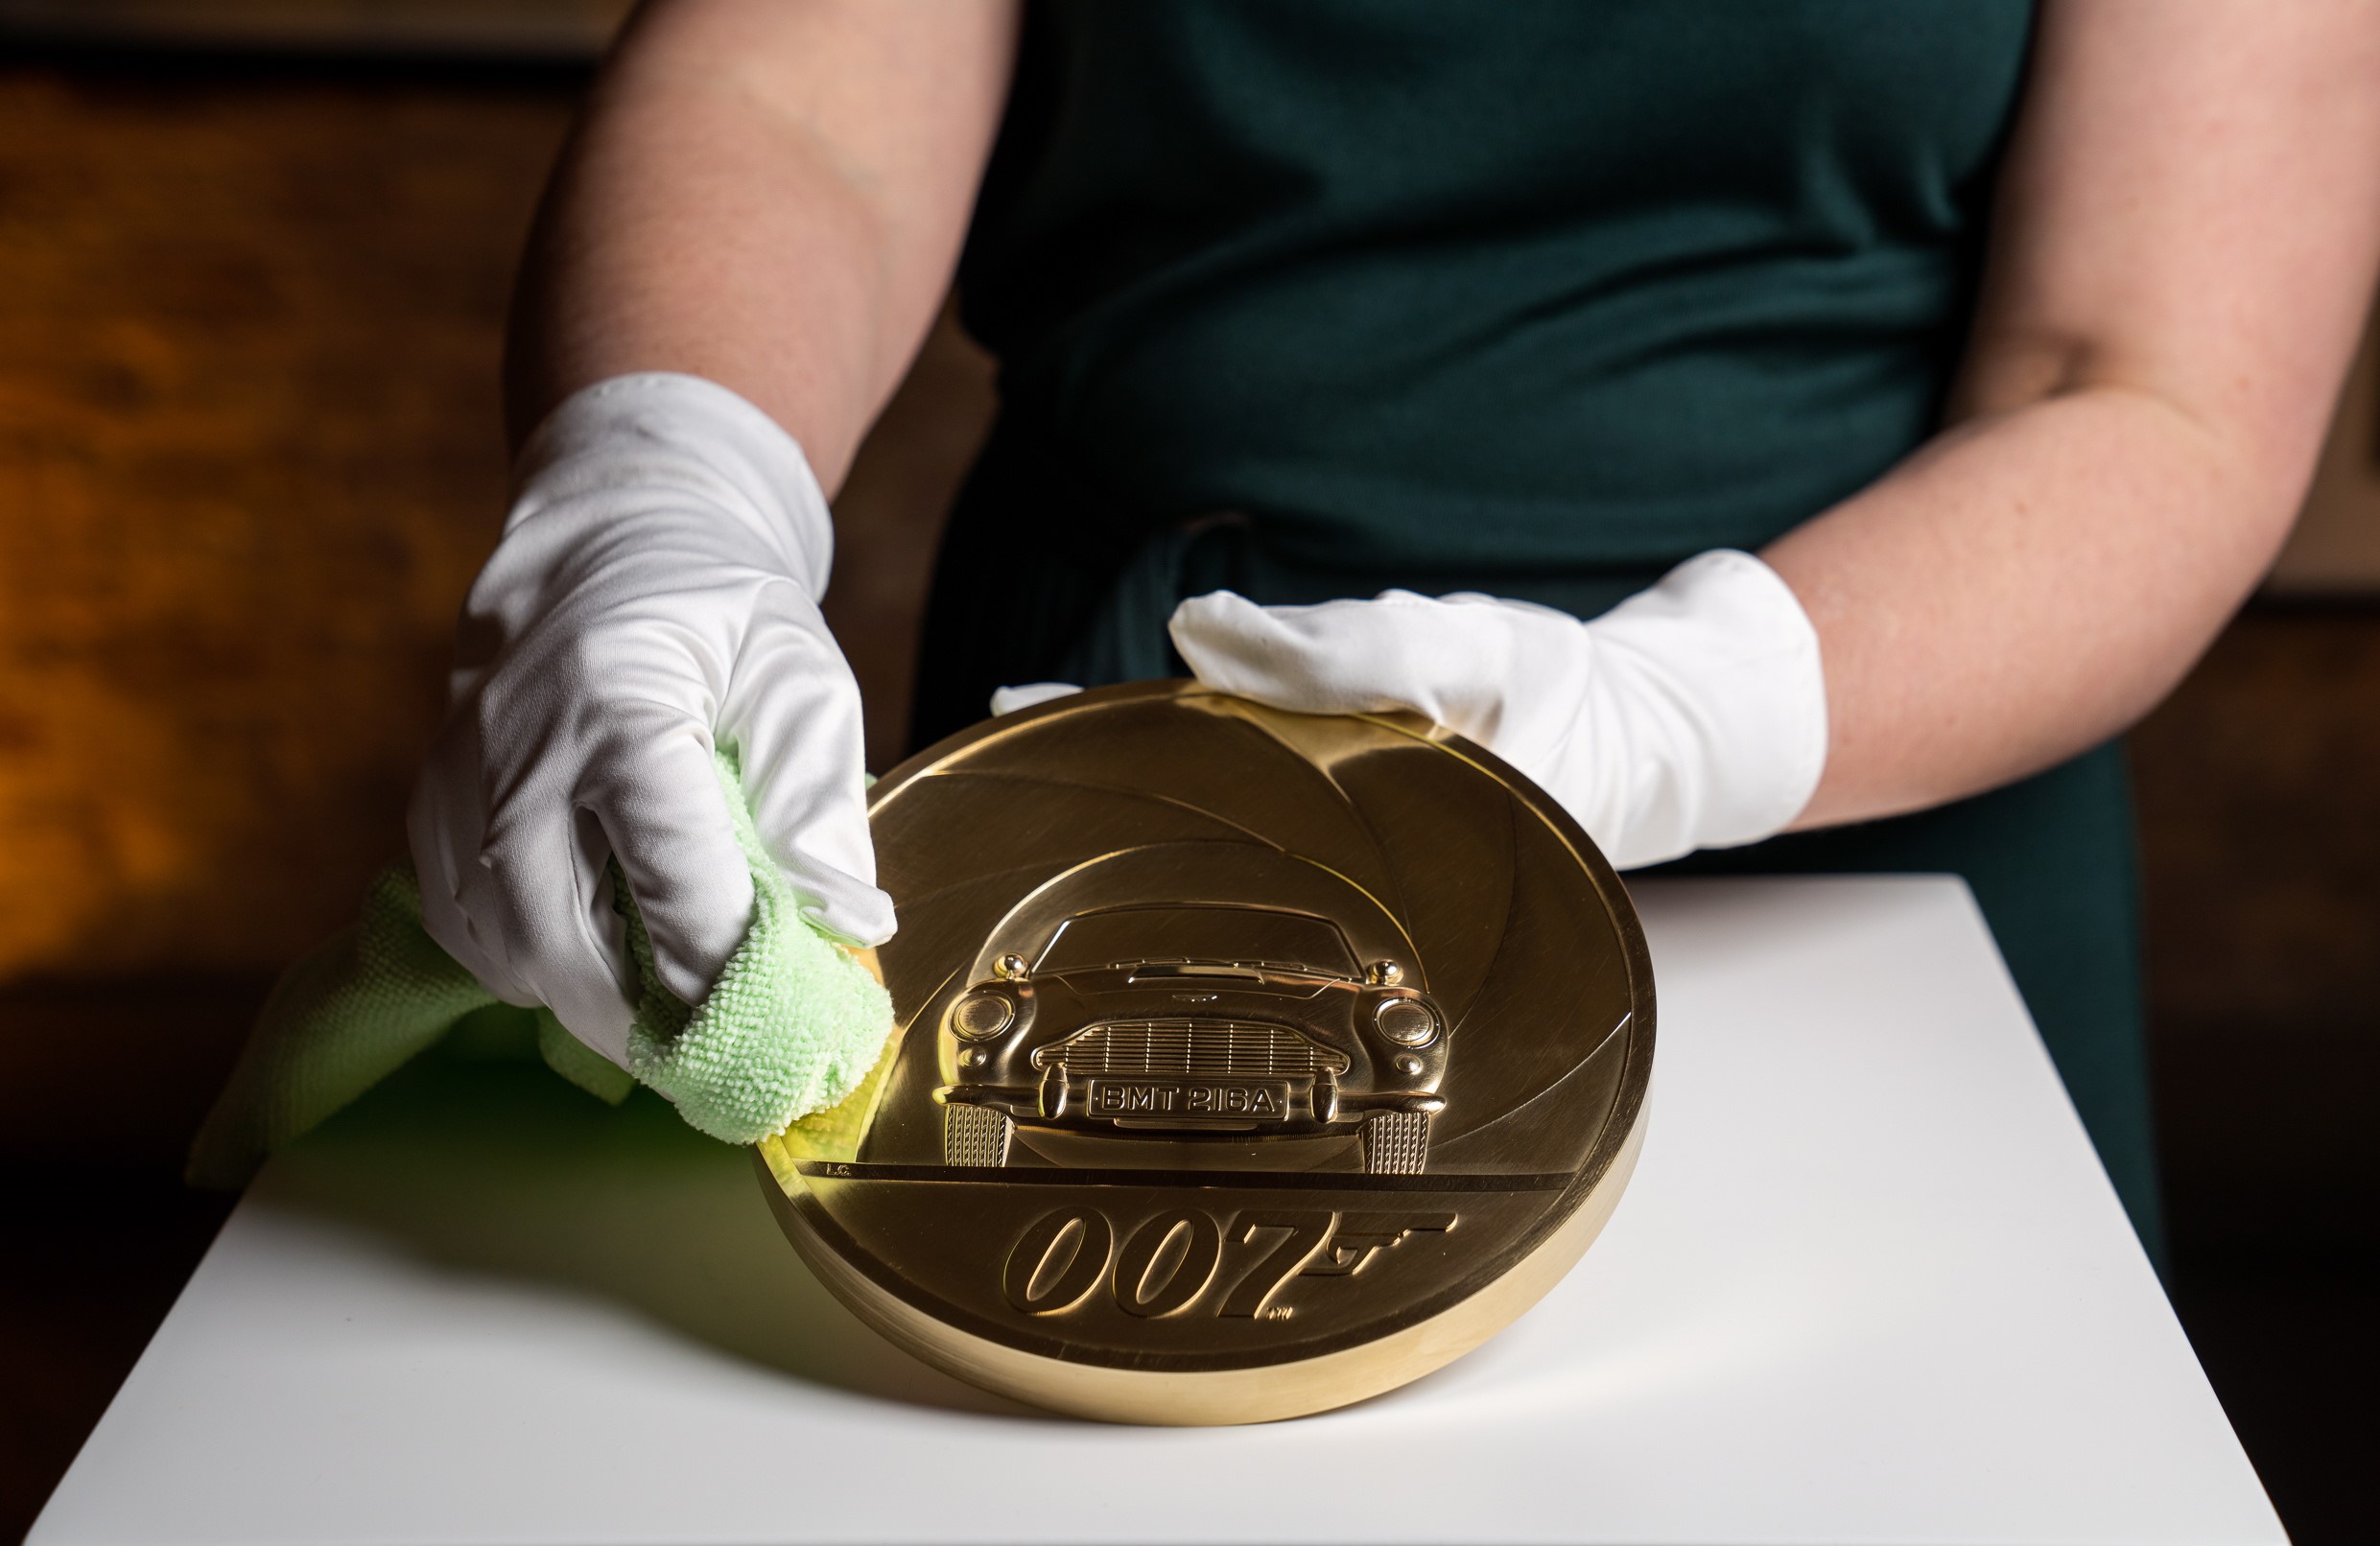 epa08266251 An undated handout photo made available by the British Royal Mint in London, Britain shows Laura Clancy (out of frame), designer at The Royal Mint, displaying a special edition James Bond themed seven-kilogram Gold Proof coin (issued 03 March 2020). The coin was unveiled on 02 March 2020, alongside a wider James Bond commemorative coin and gold bar collection at a launch event at Bond in Motion, Covent Garden, to celebrate the upcoming release of the 25th James Bond film.  EPA/THE ROYAL MINT HANDOUT  HANDOUT EDITORIAL USE ONLY/NO SALES